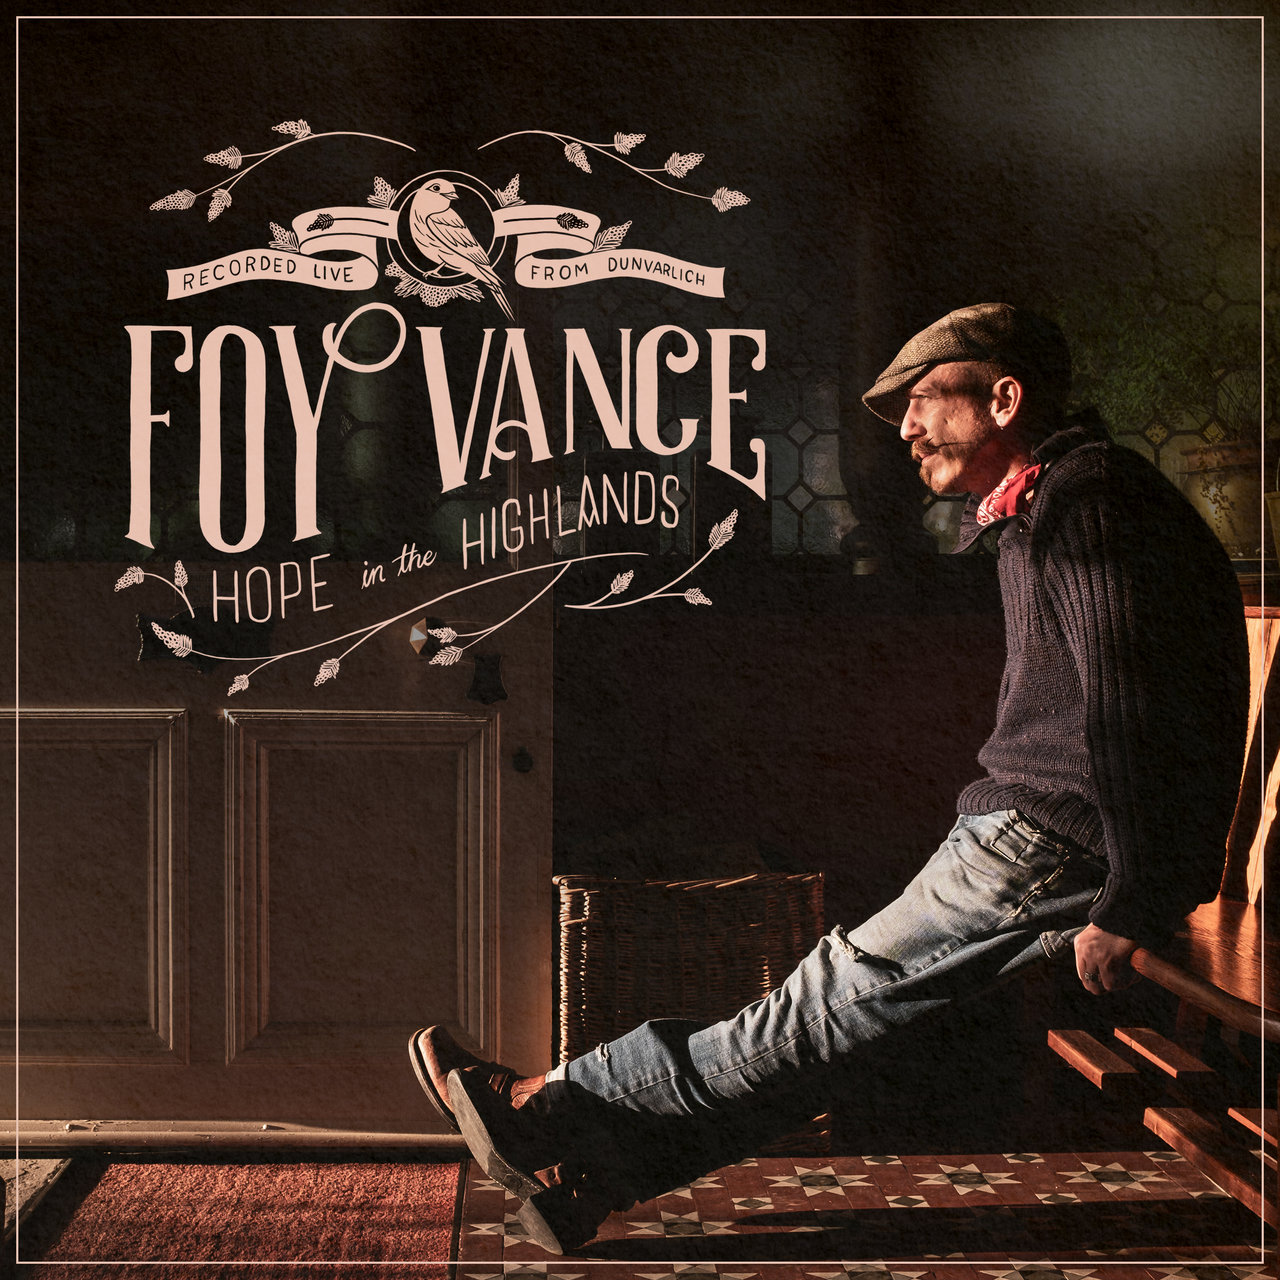 Foy Vance – Hope in The Highlands: Recorded Live From Dunvarli (2020) [FLAC 24bit/48kHz]